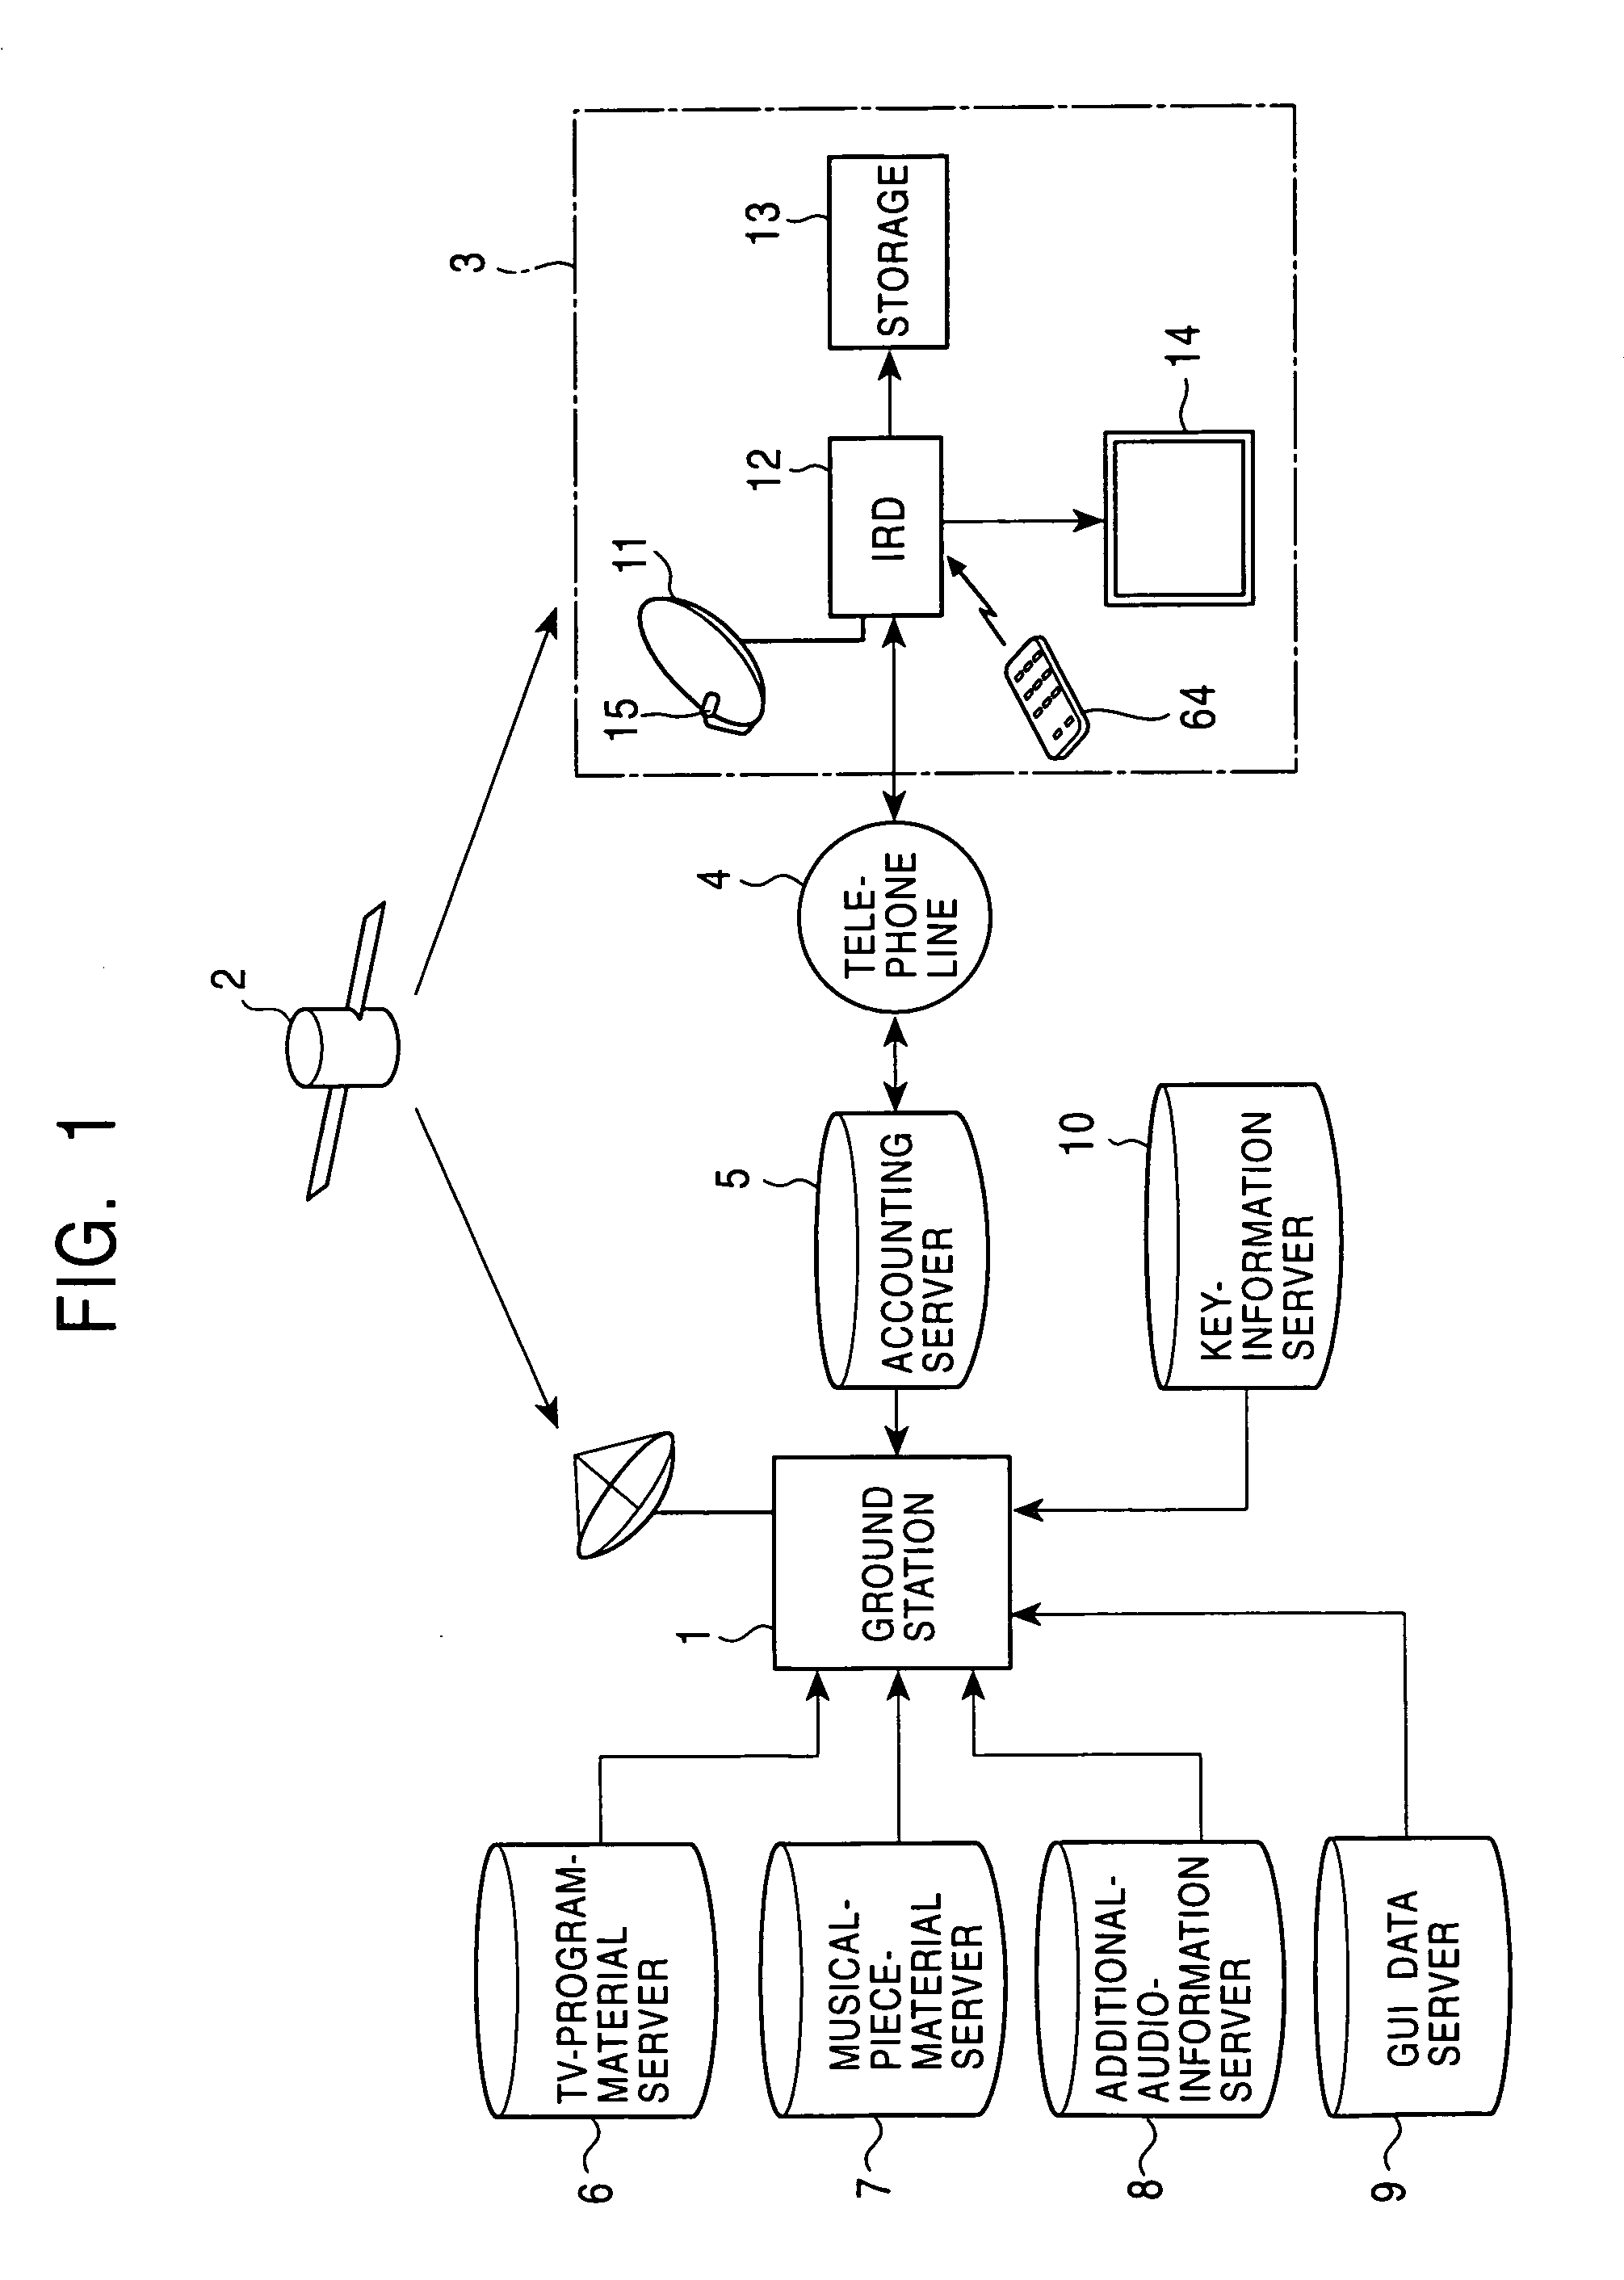 Apparatus and method for downloading desired data signal to user-selectable storage unit